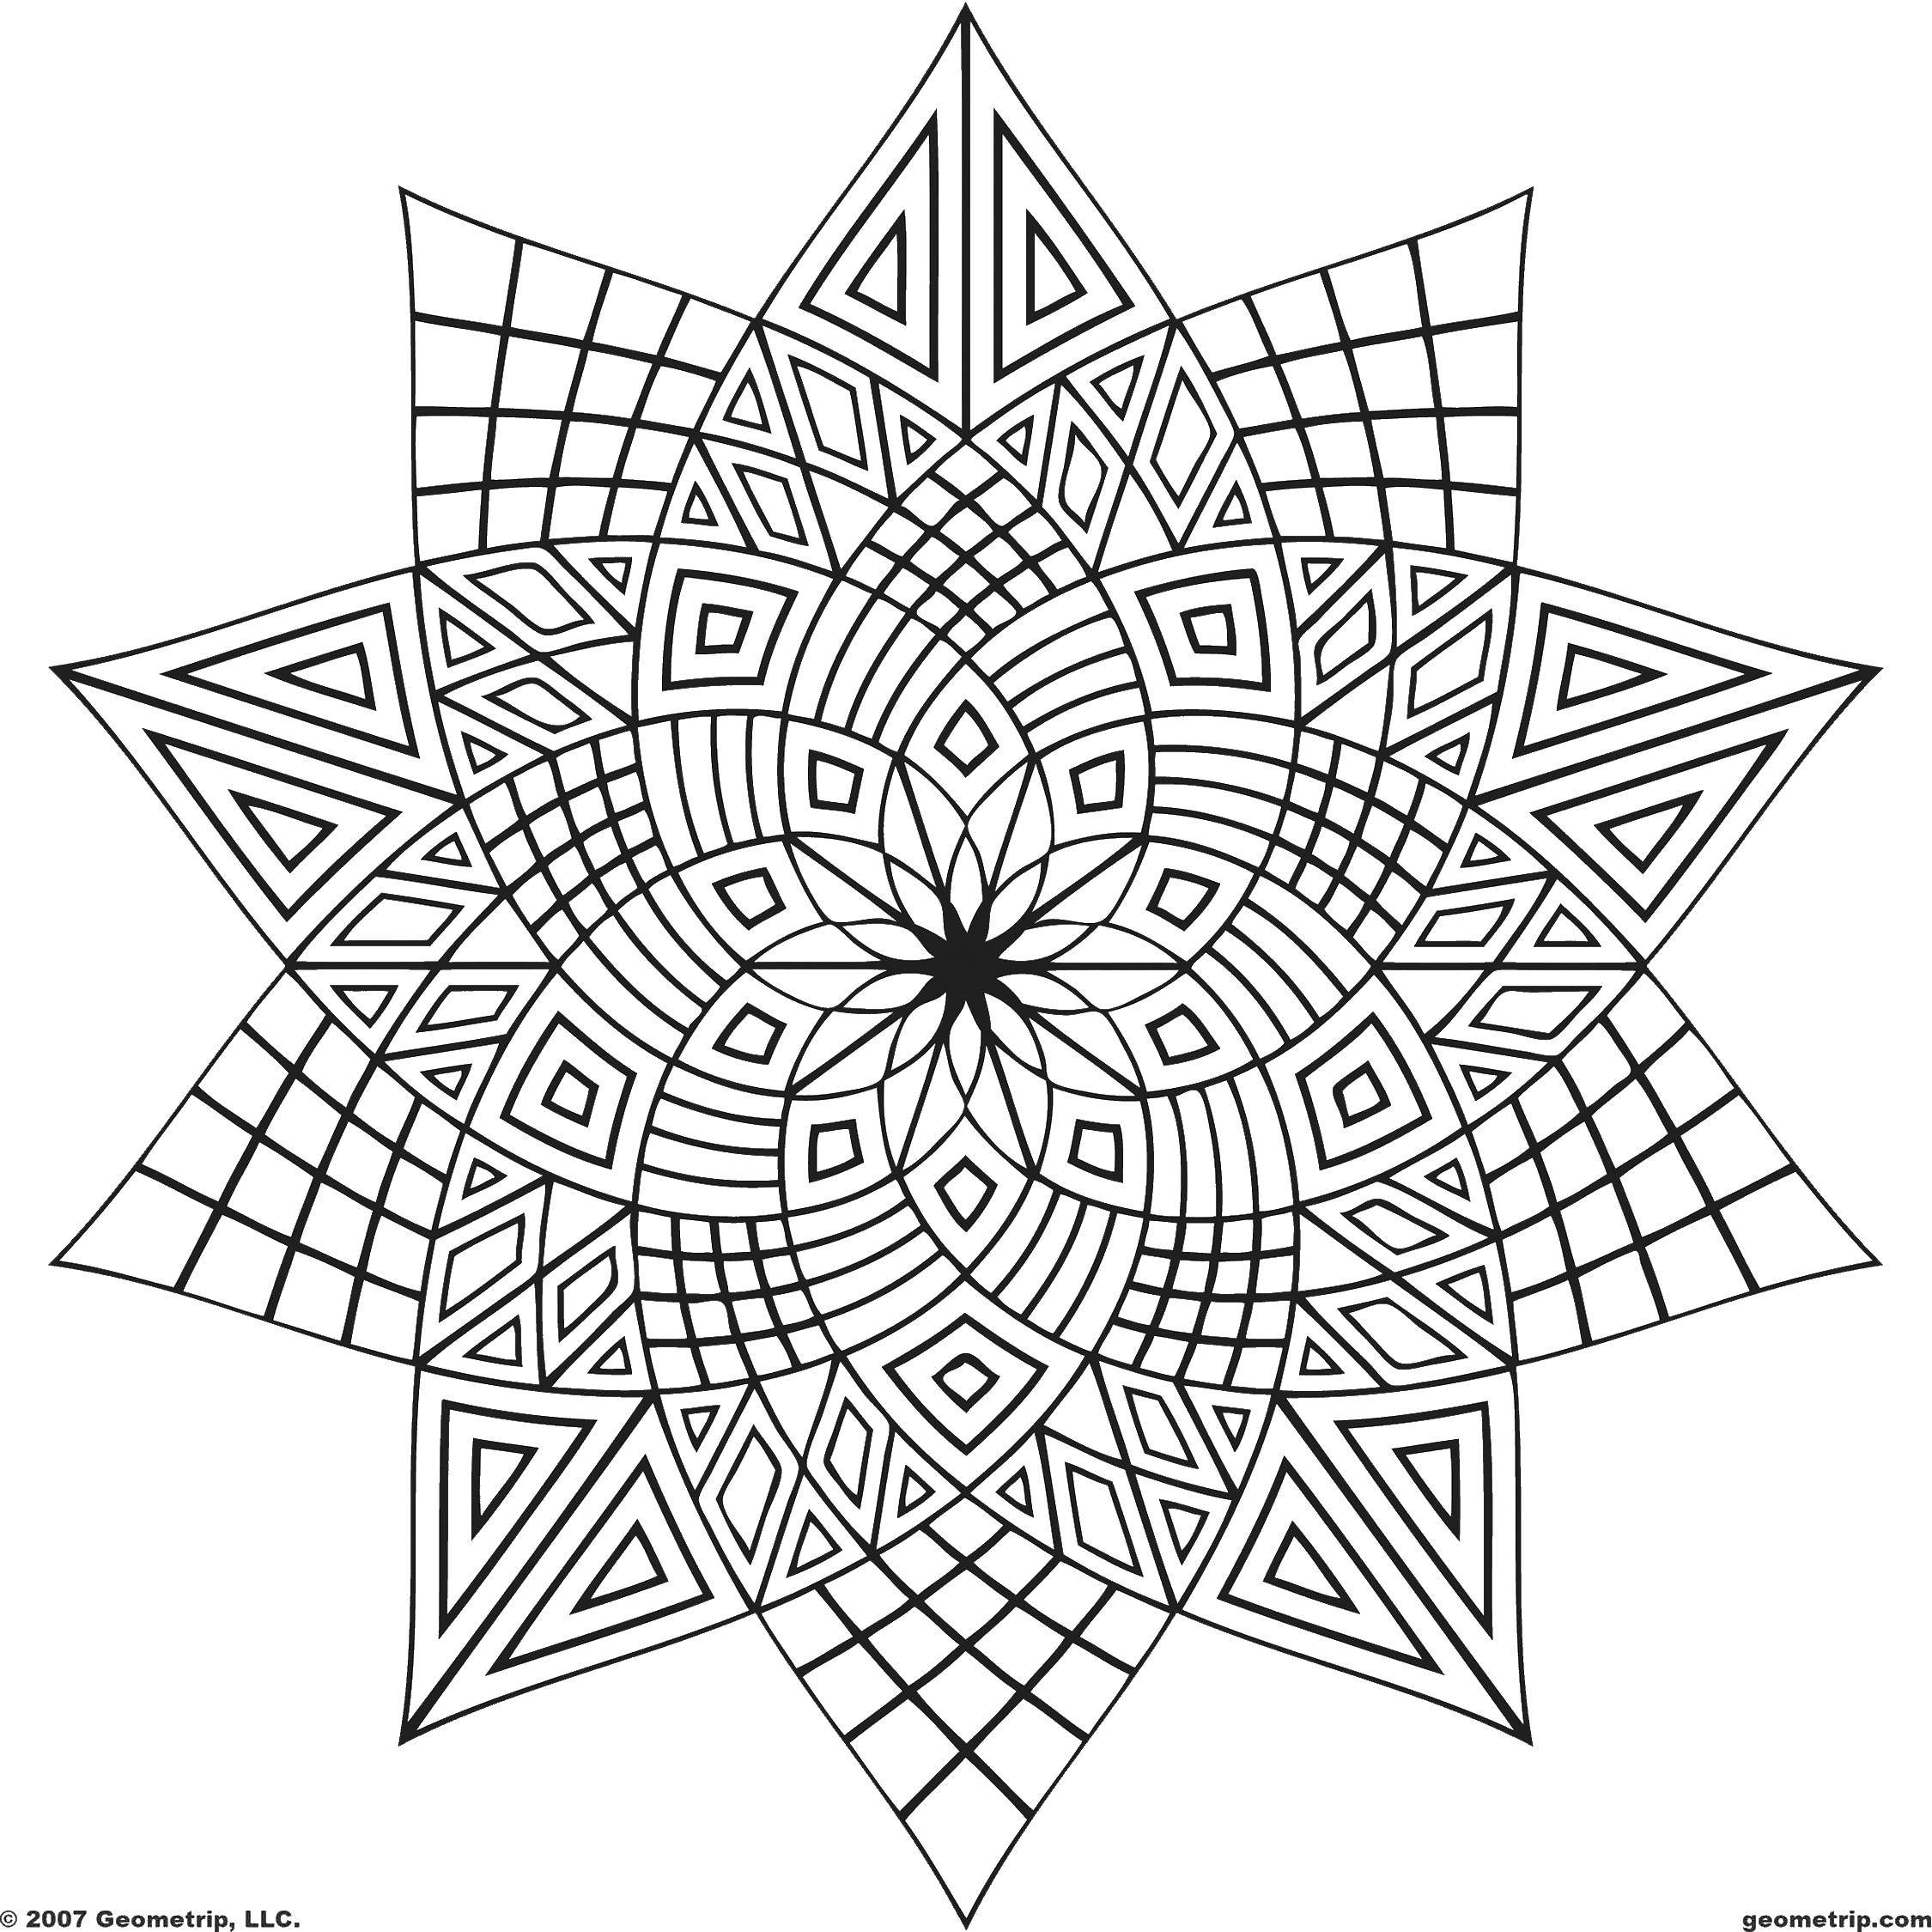 Coloring A flower with sharp leaves. Category Patterns. Tags:  Patterns, flower.